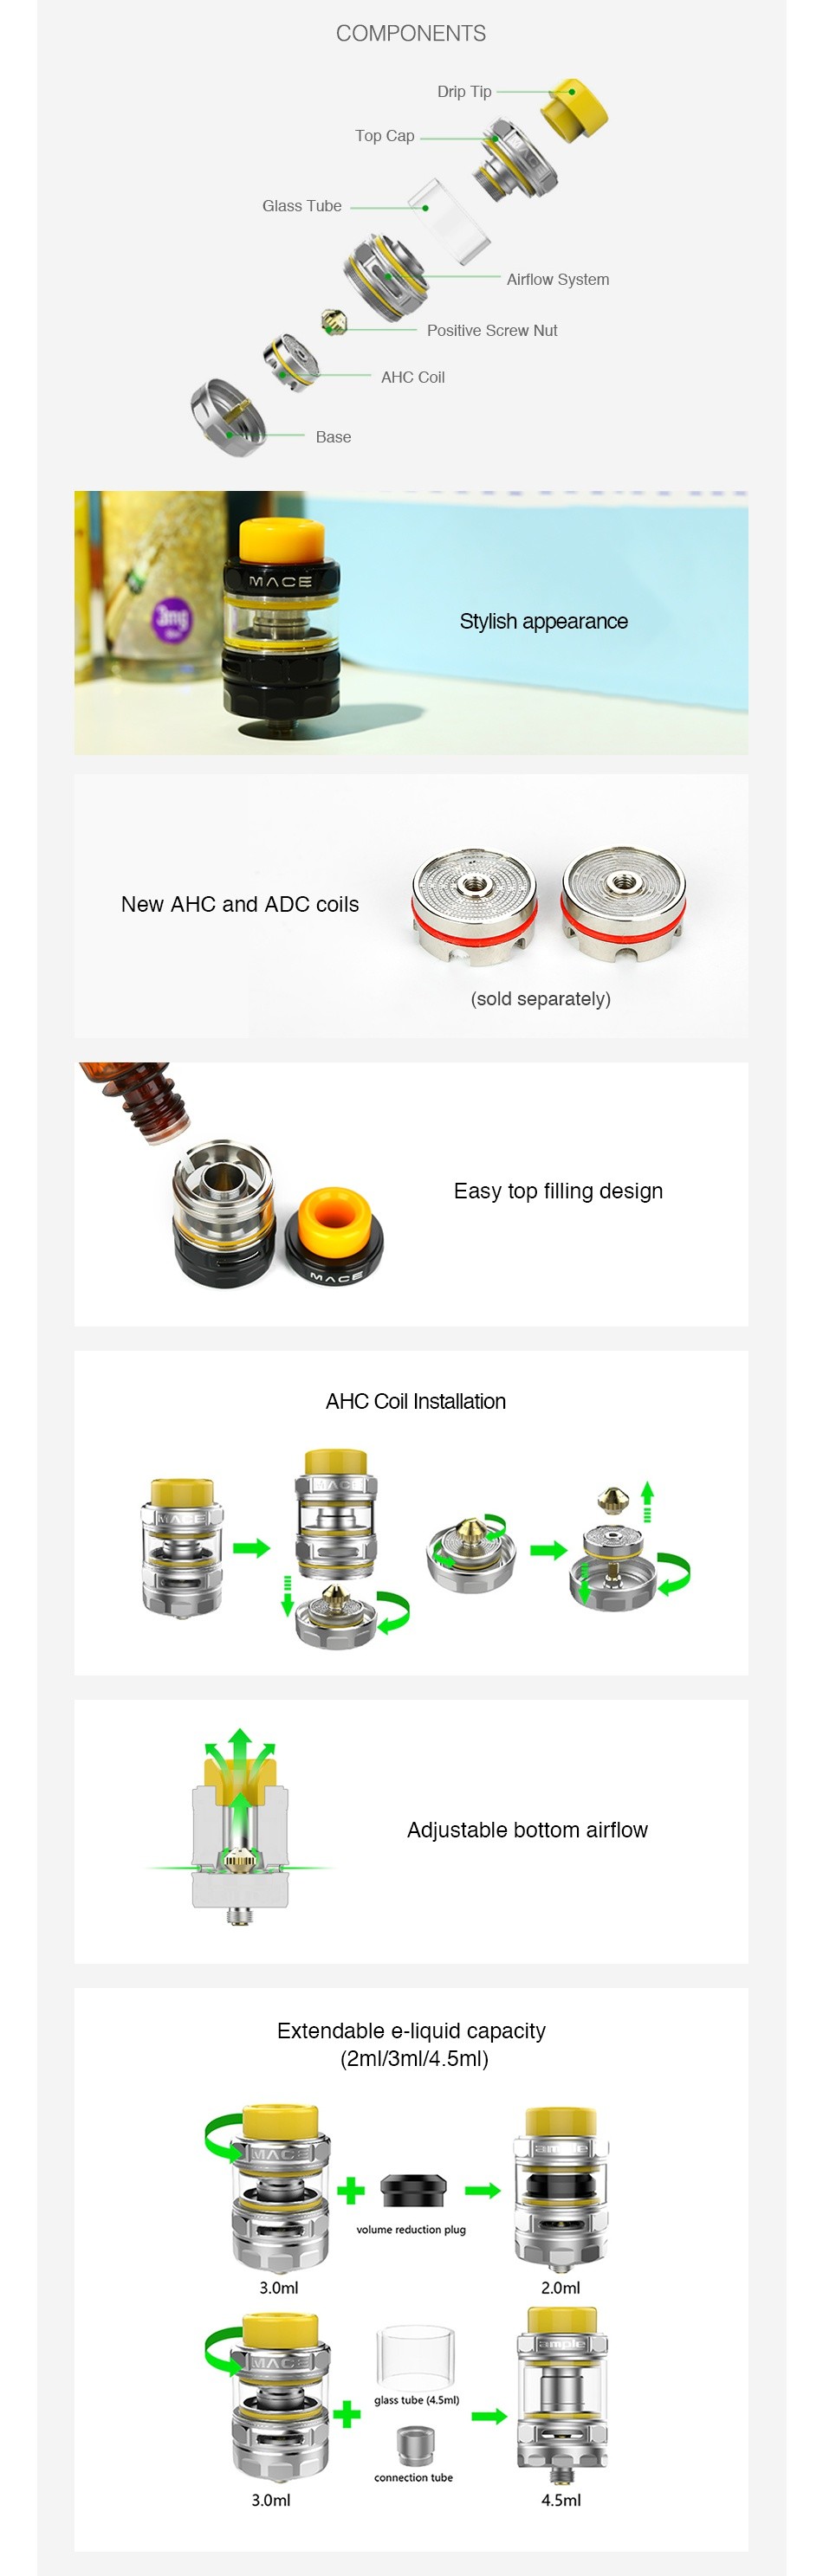 Ample Mace Subohm Tank 2ml/3ml COMPONENTS Drip lip   positive screw Nul AHC Coil Stylish appearance New ahc and adc coil  sold separately  Easy top filling design AHC Coil Installation Adjustable bottom airflow Extendable e liquid capacity  2m3m4 5m     3 0m lbe  4 Smll connection tube